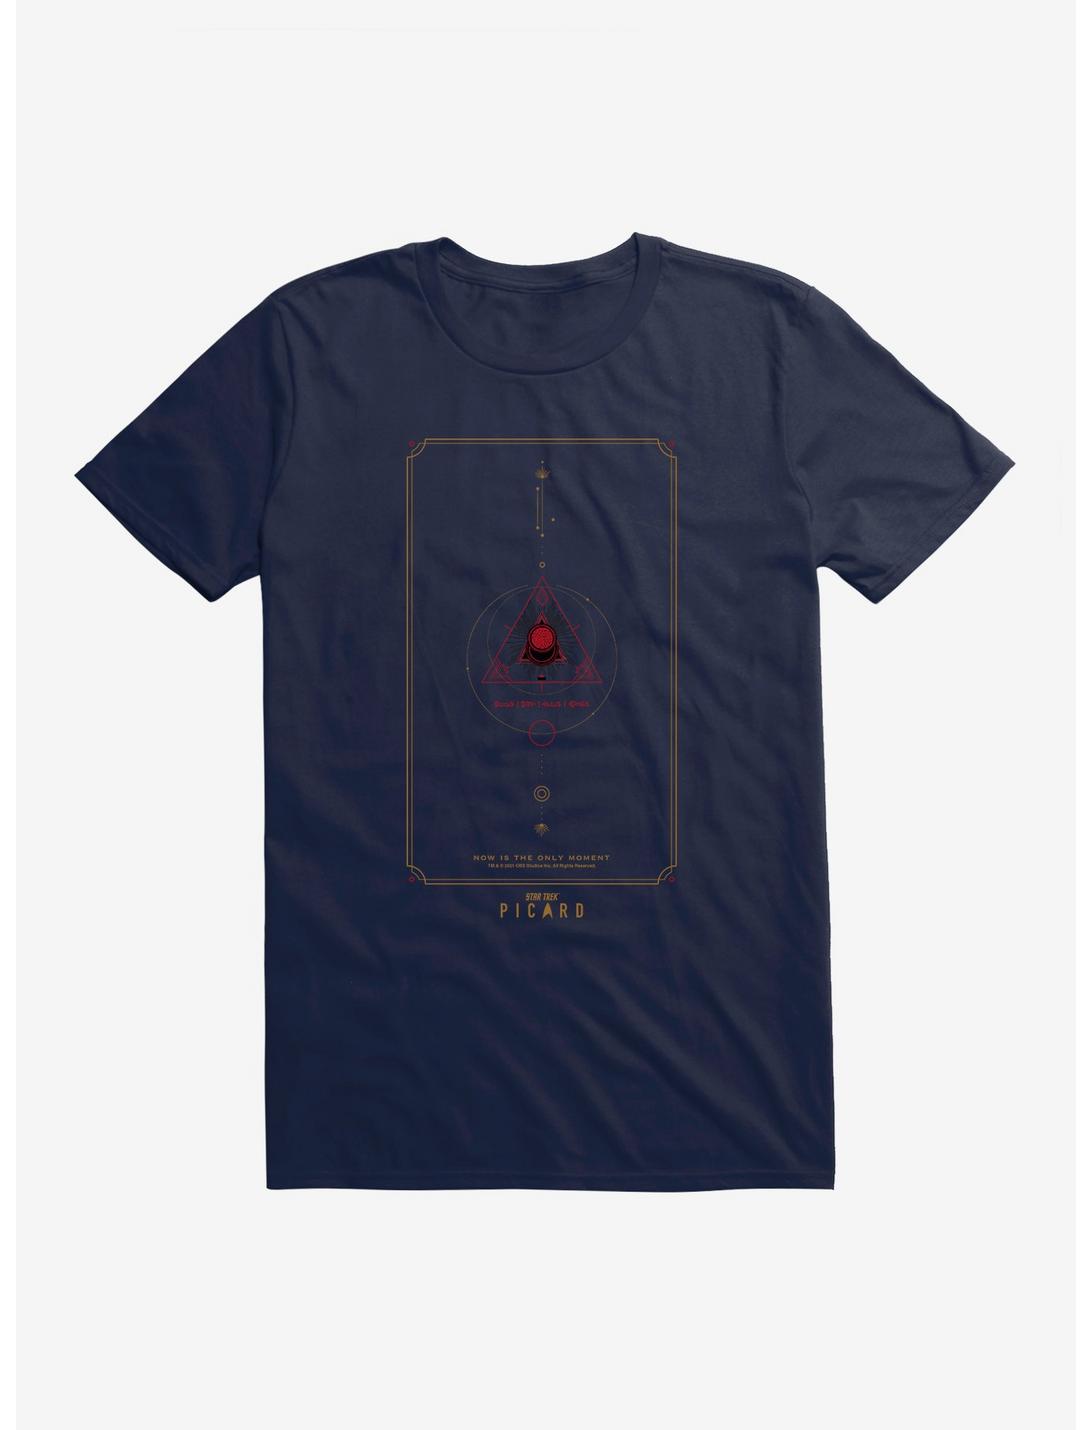 Star Trek: Picard Now Is The Only Moment T-Shirt, MIDNIGHT NAVY, hi-res